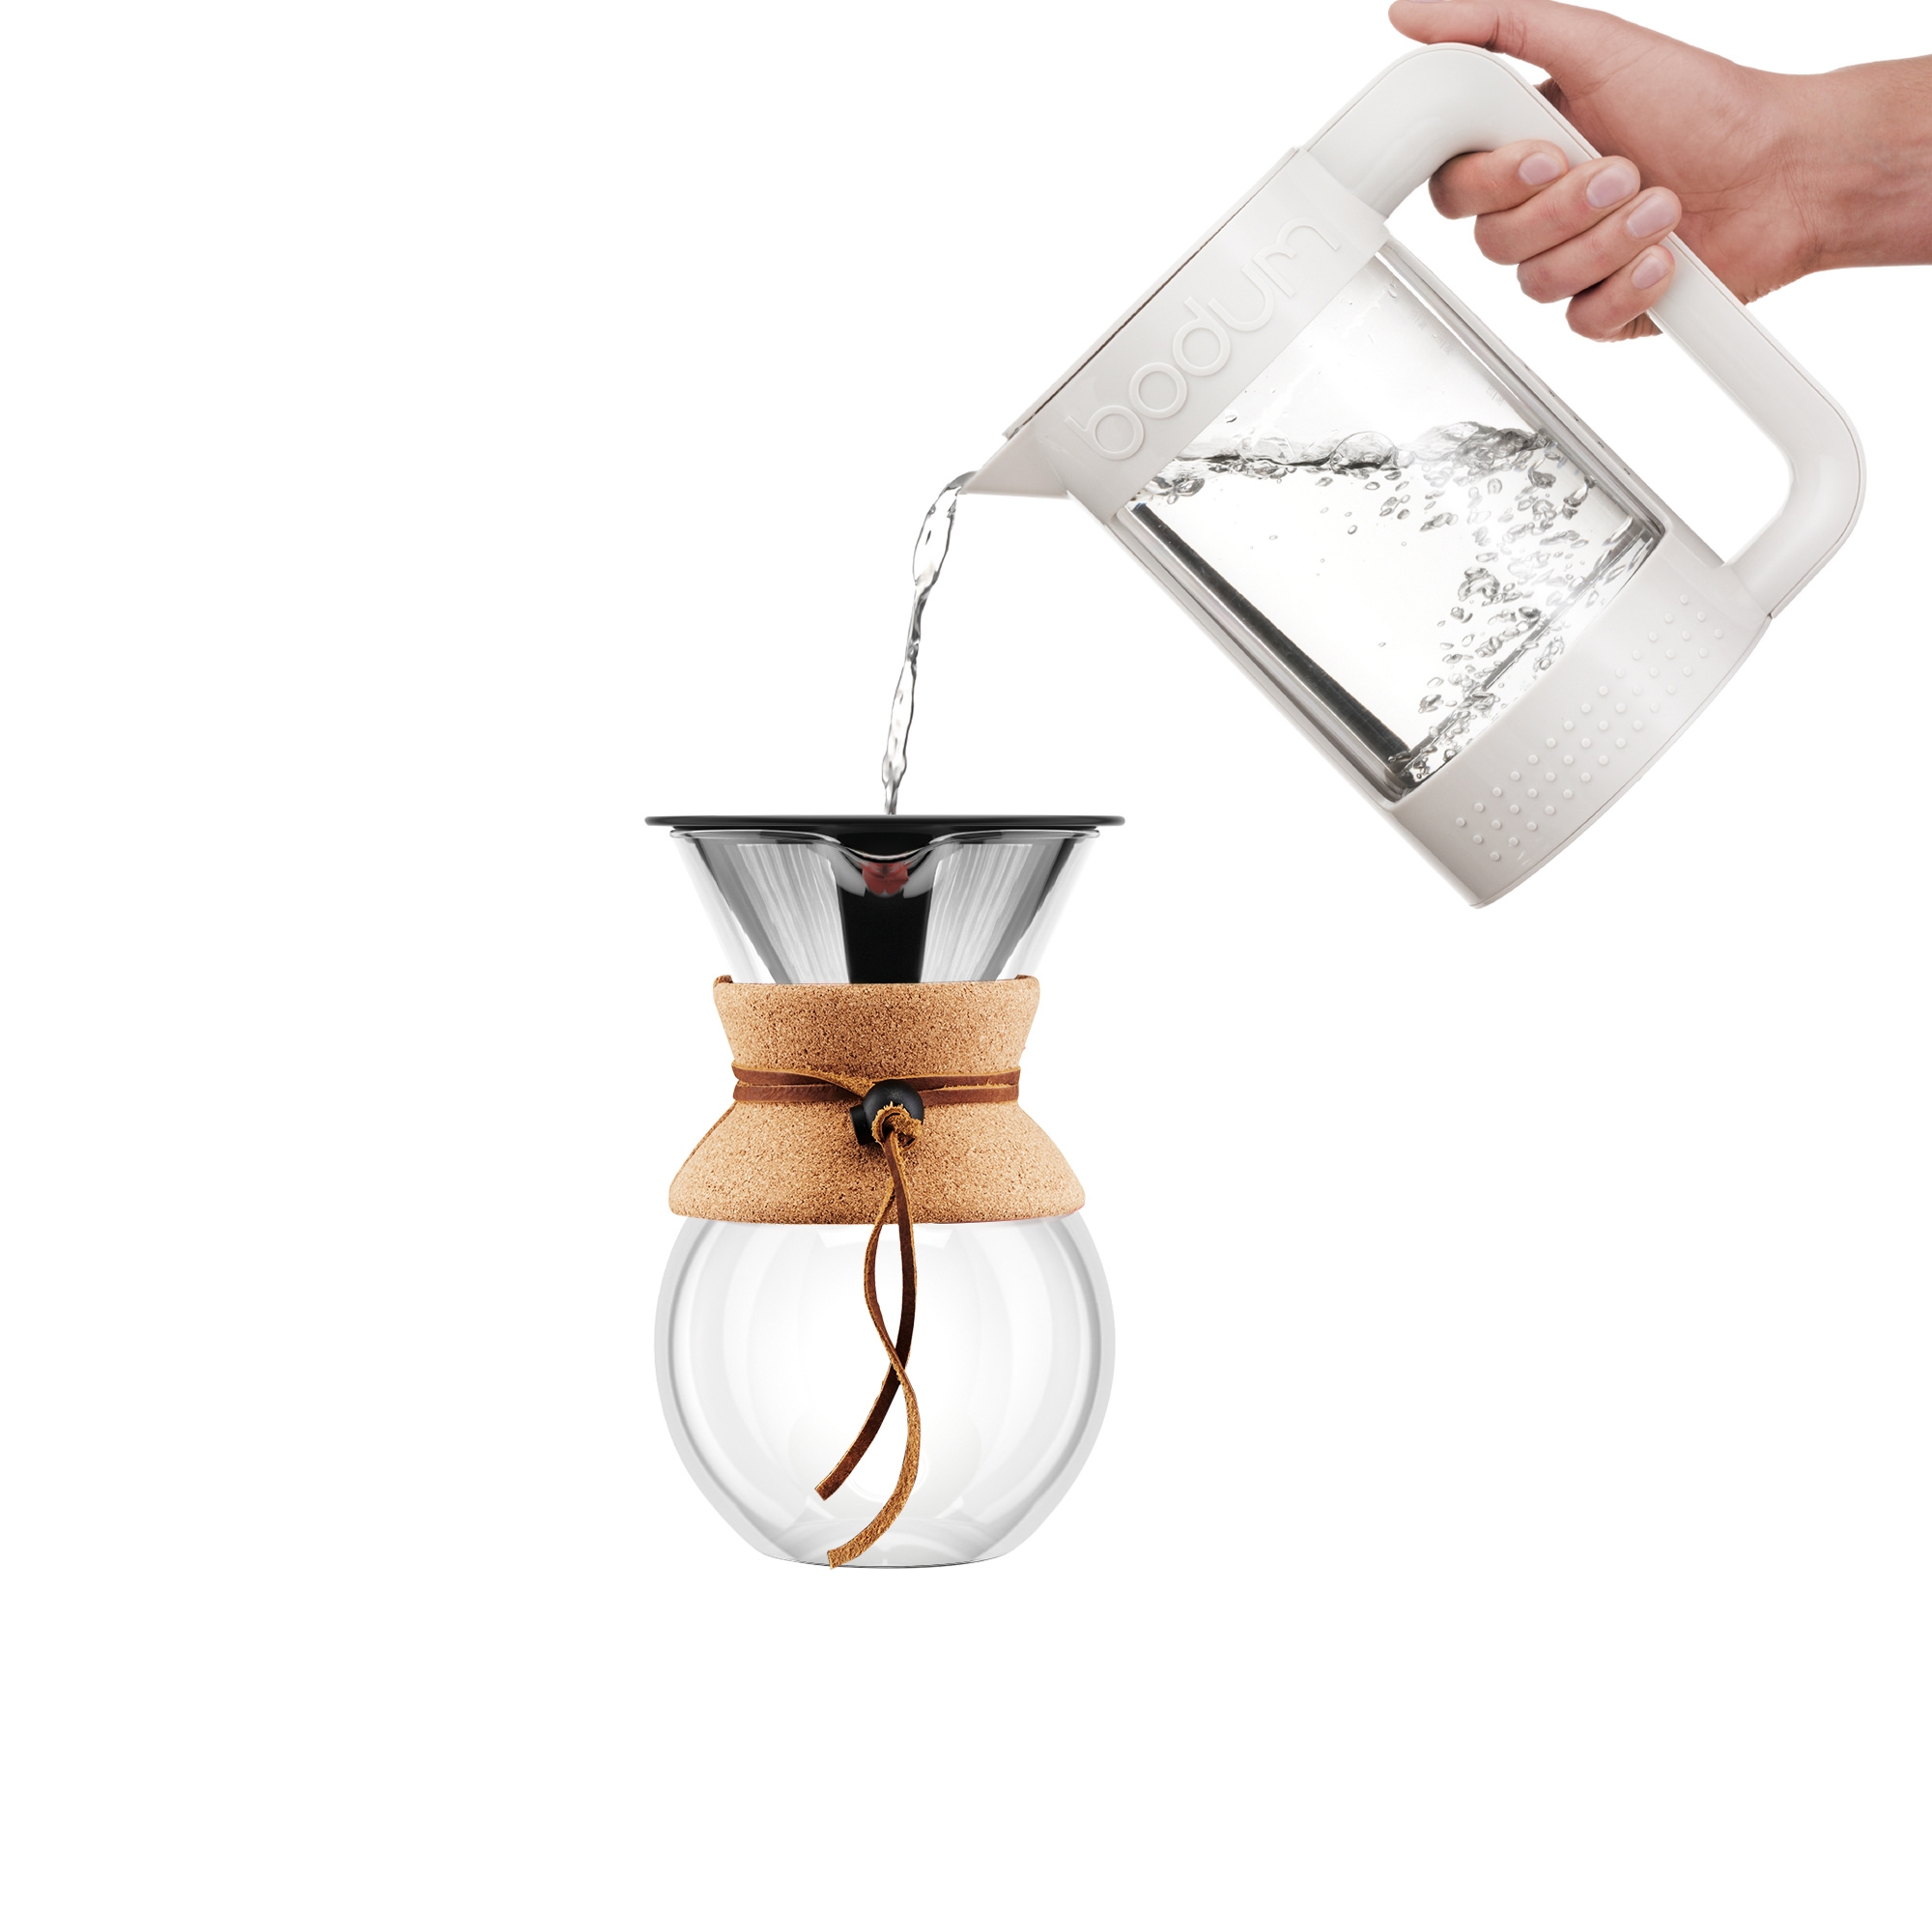 Bodum Pour Over Coffee Maker 8 Cup Image 2